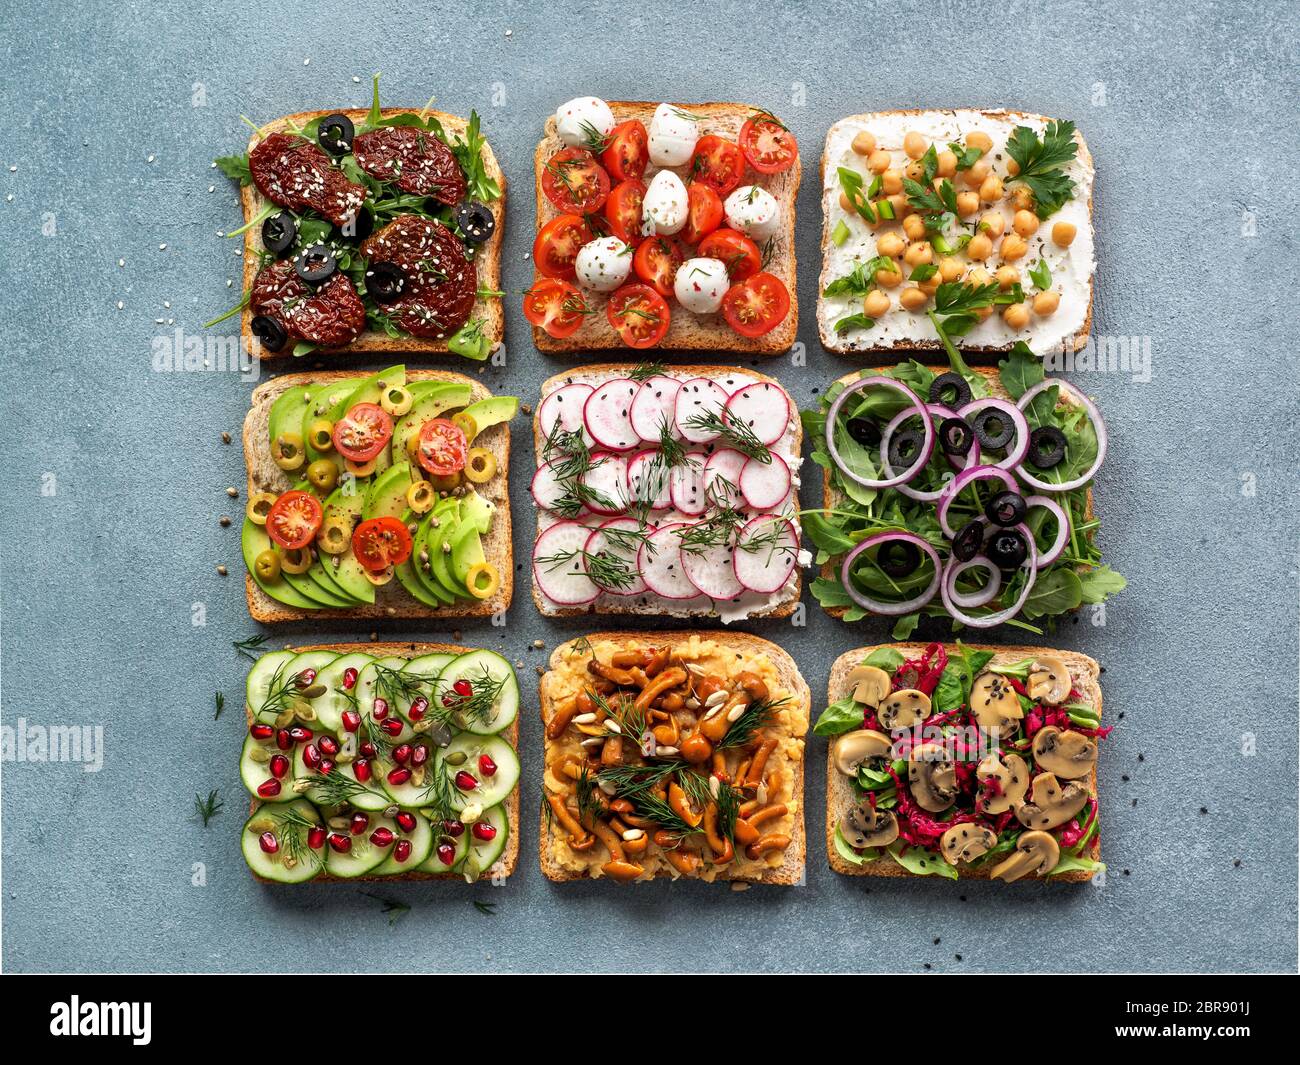 Assortment vegan sandwiches on gray stone background. Set different vegetarian smorrebrod. Top view or flat lay. Stock Photo